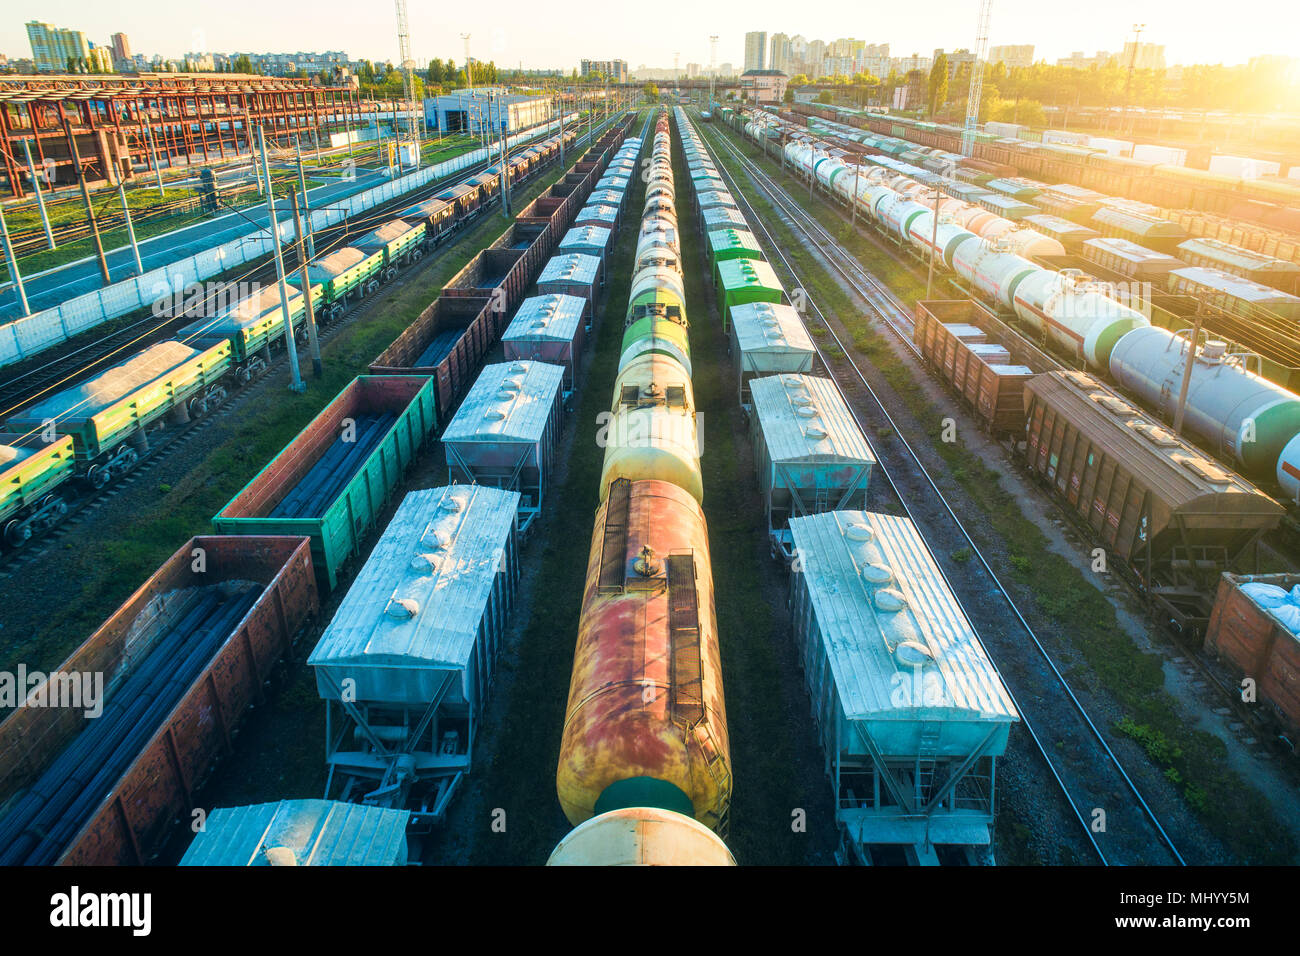 Cargo wagons. Aerial view of colorful freight trains. Railway station. Colorful wagons with goods on railroad. Heavy industry. Industrial landscape wi Stock Photo